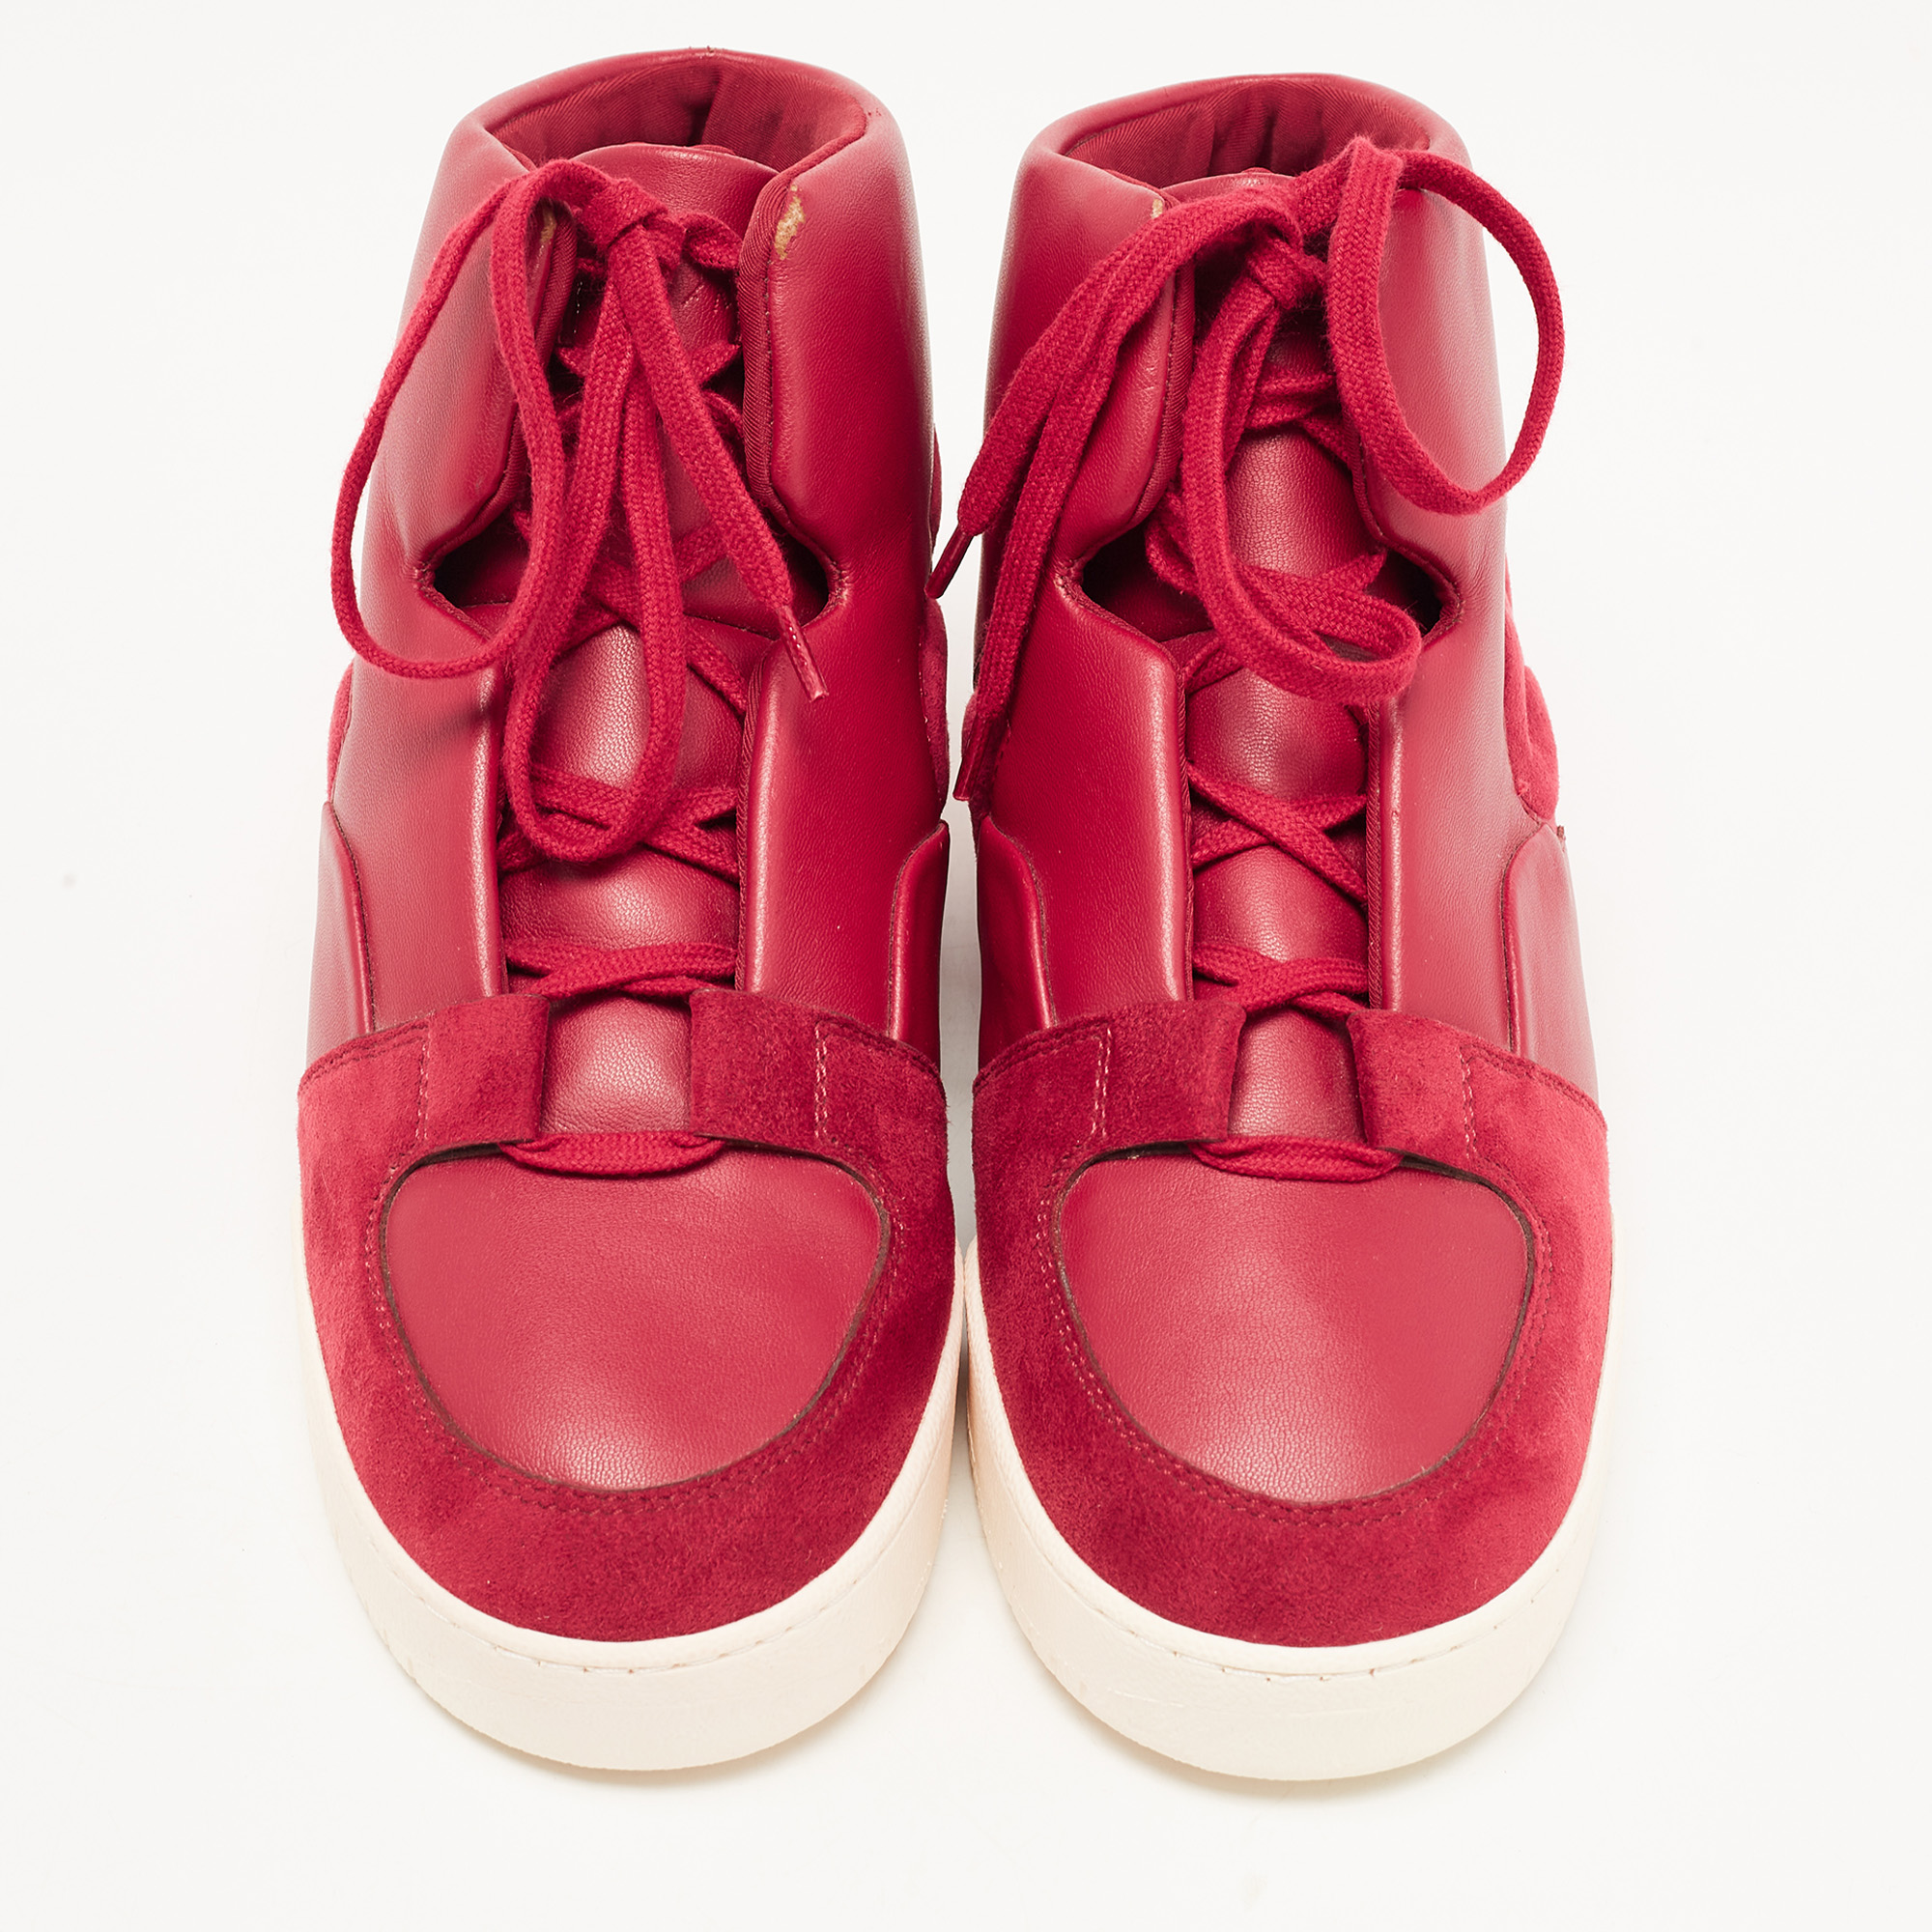 Stella McCartney Red Faux Leather And Faux Suede High Top Sneakers Size 37